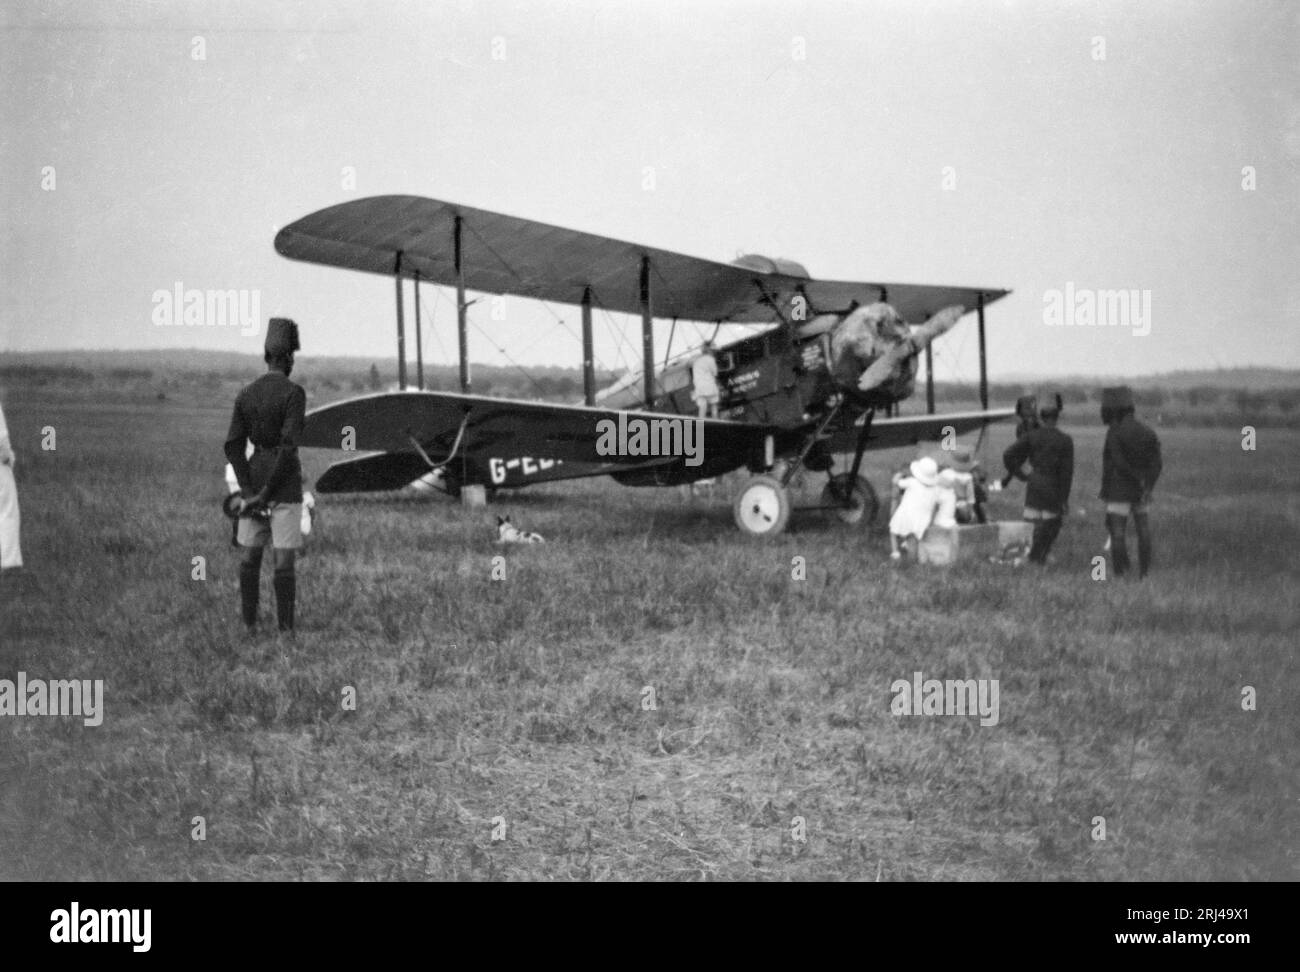 An Imperial Airways De Havilland DH50J aircraft, G-EBFO, in North Africa in January 1926. Stock Photo